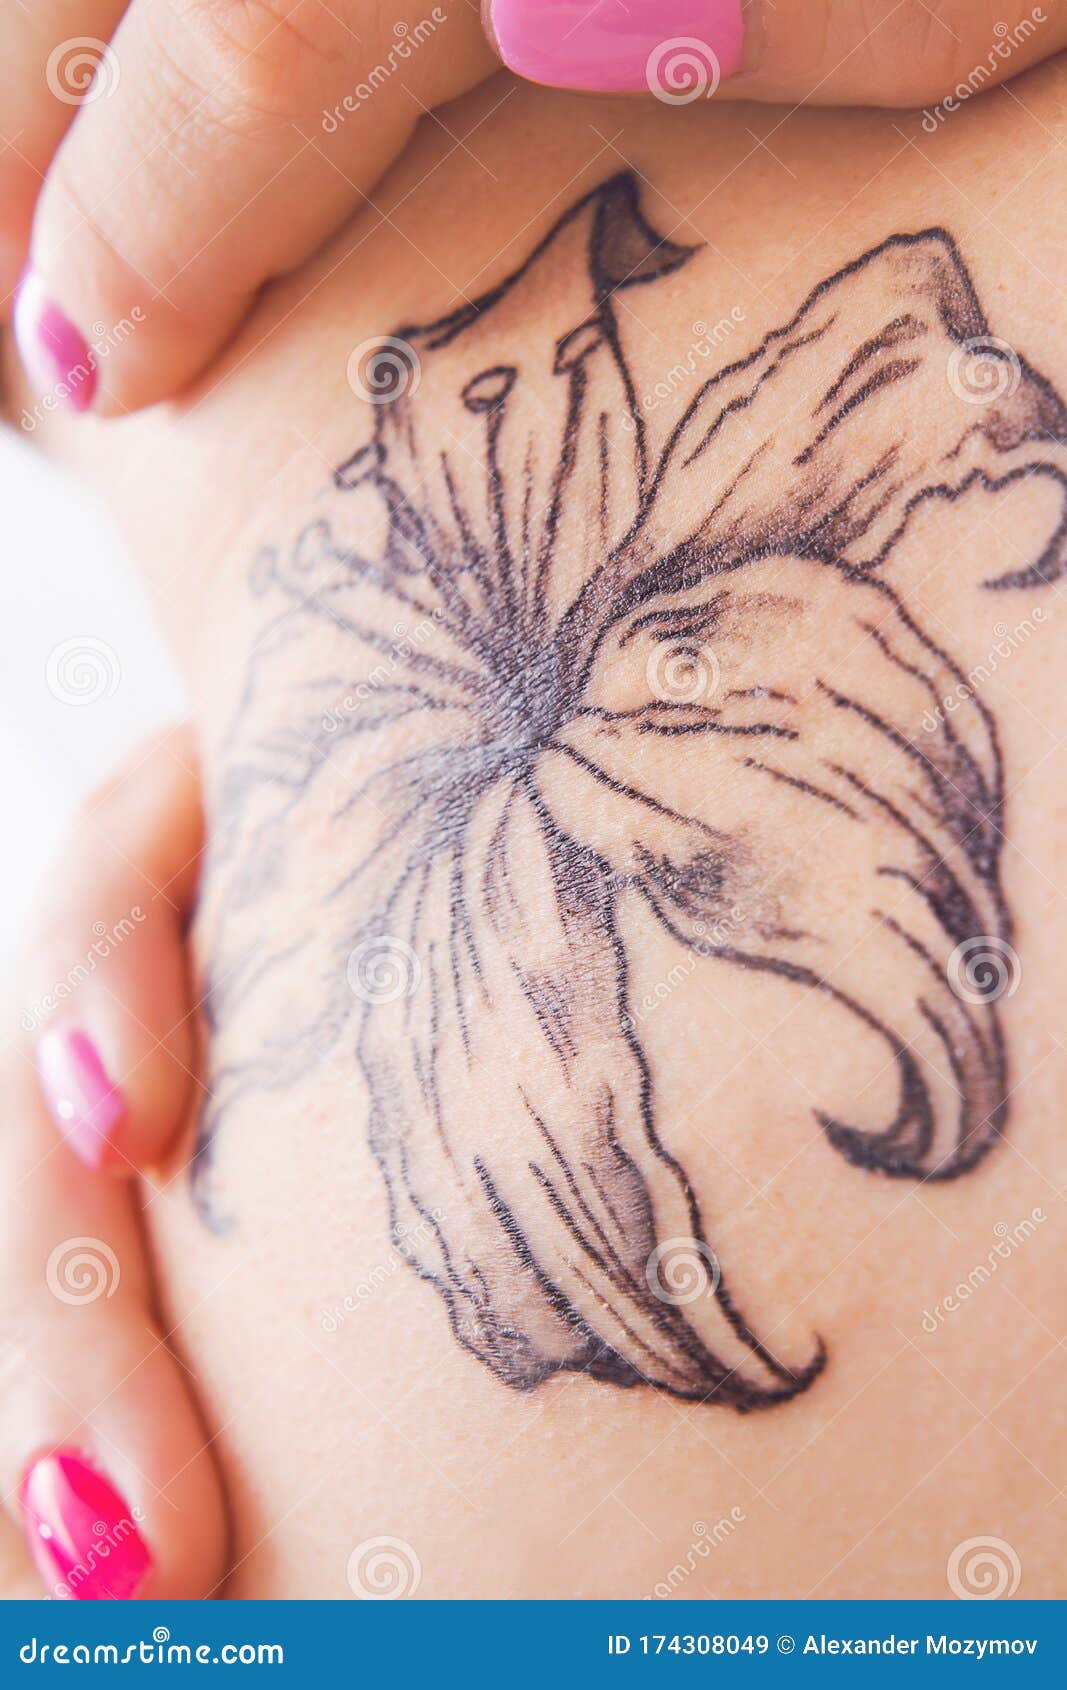 Page 2  Lily Tattoo Images  Free Download on Freepik